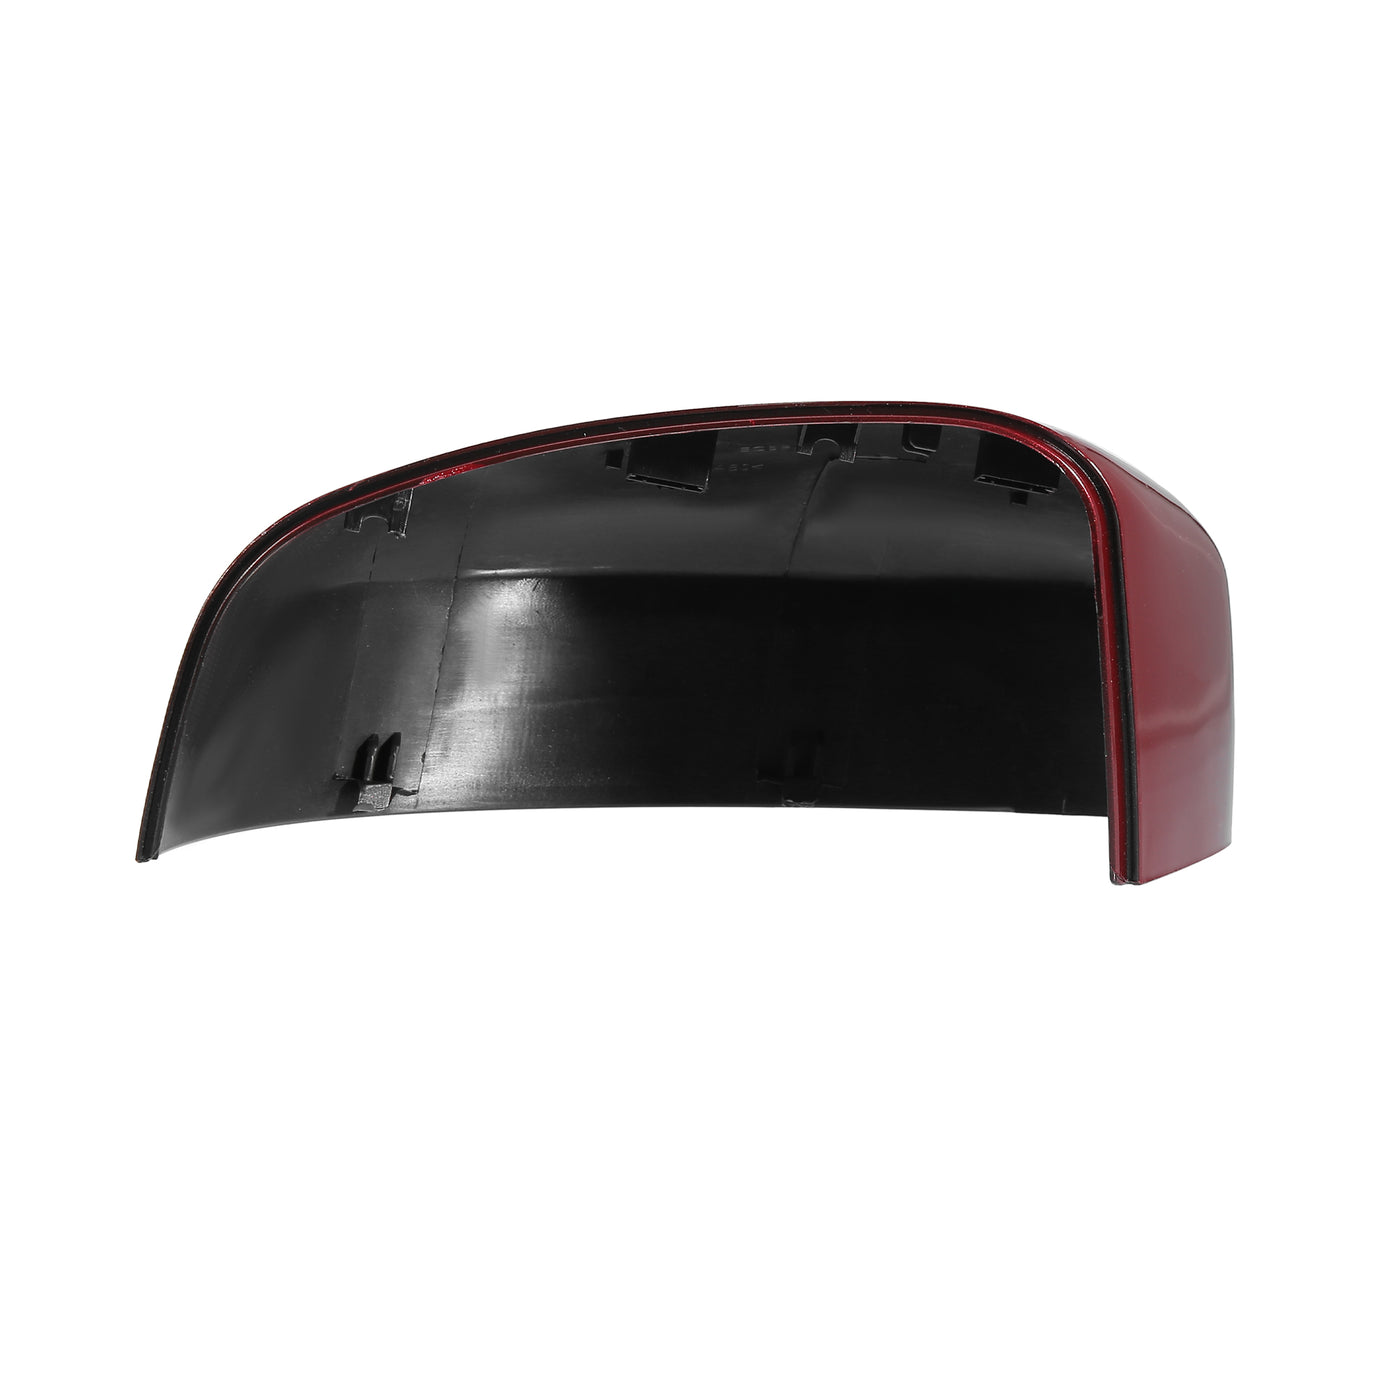 X AUTOHAUX Red Left Side Car Side Door Wing Mirror Cover Rear View Mirror Cap for Ford Focus MK2 Facelift 2008-2011 for Ford Focus MK3 2012-2017